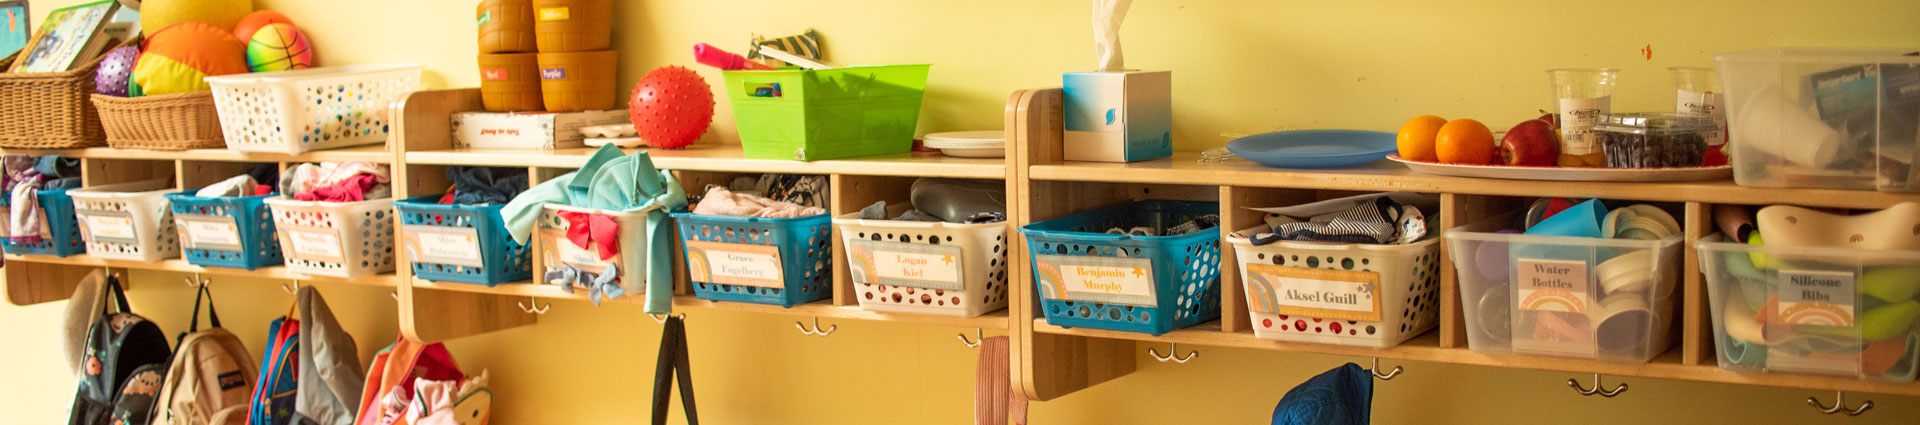 A shelf with student's supplies and backpacks